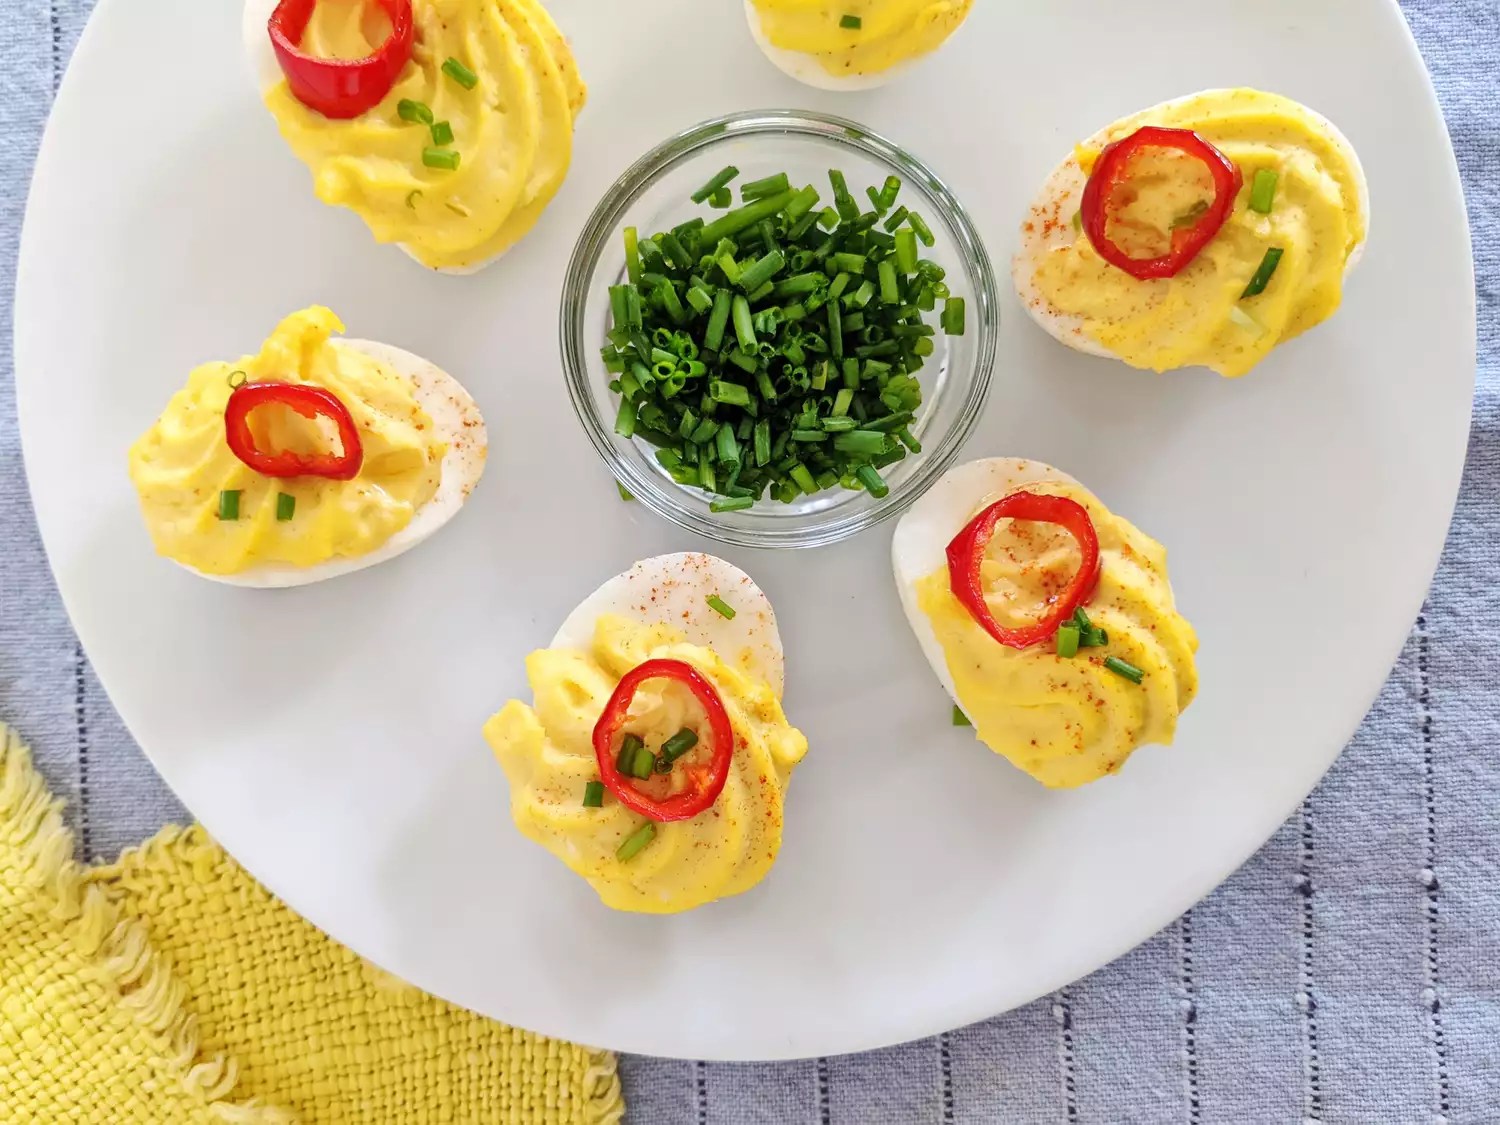 Unbelievably Delicious Deviled Eggs! Try Them Now!